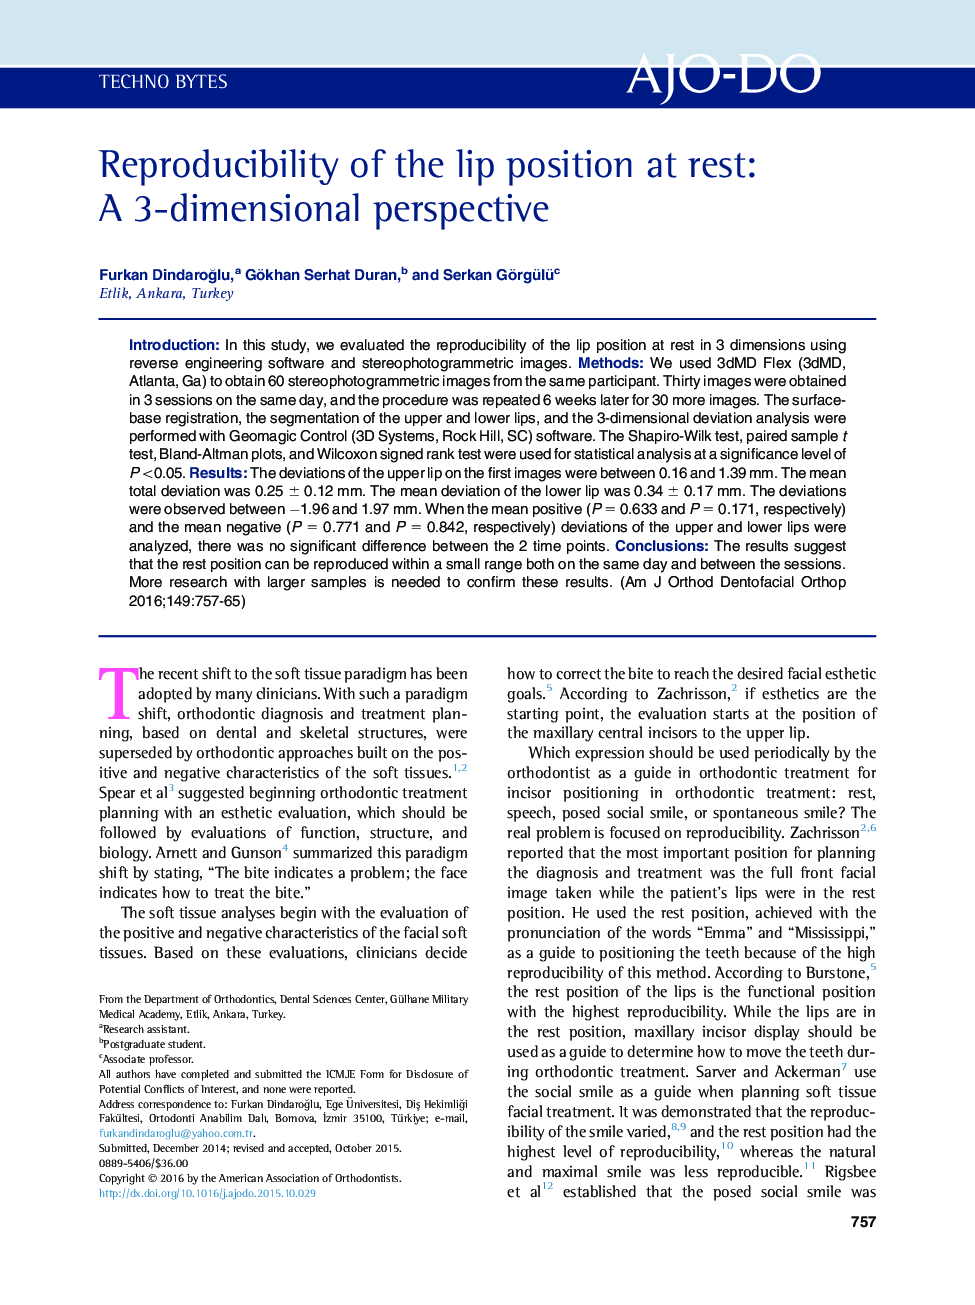 Reproducibility of the lip position at rest: A 3-dimensional perspective